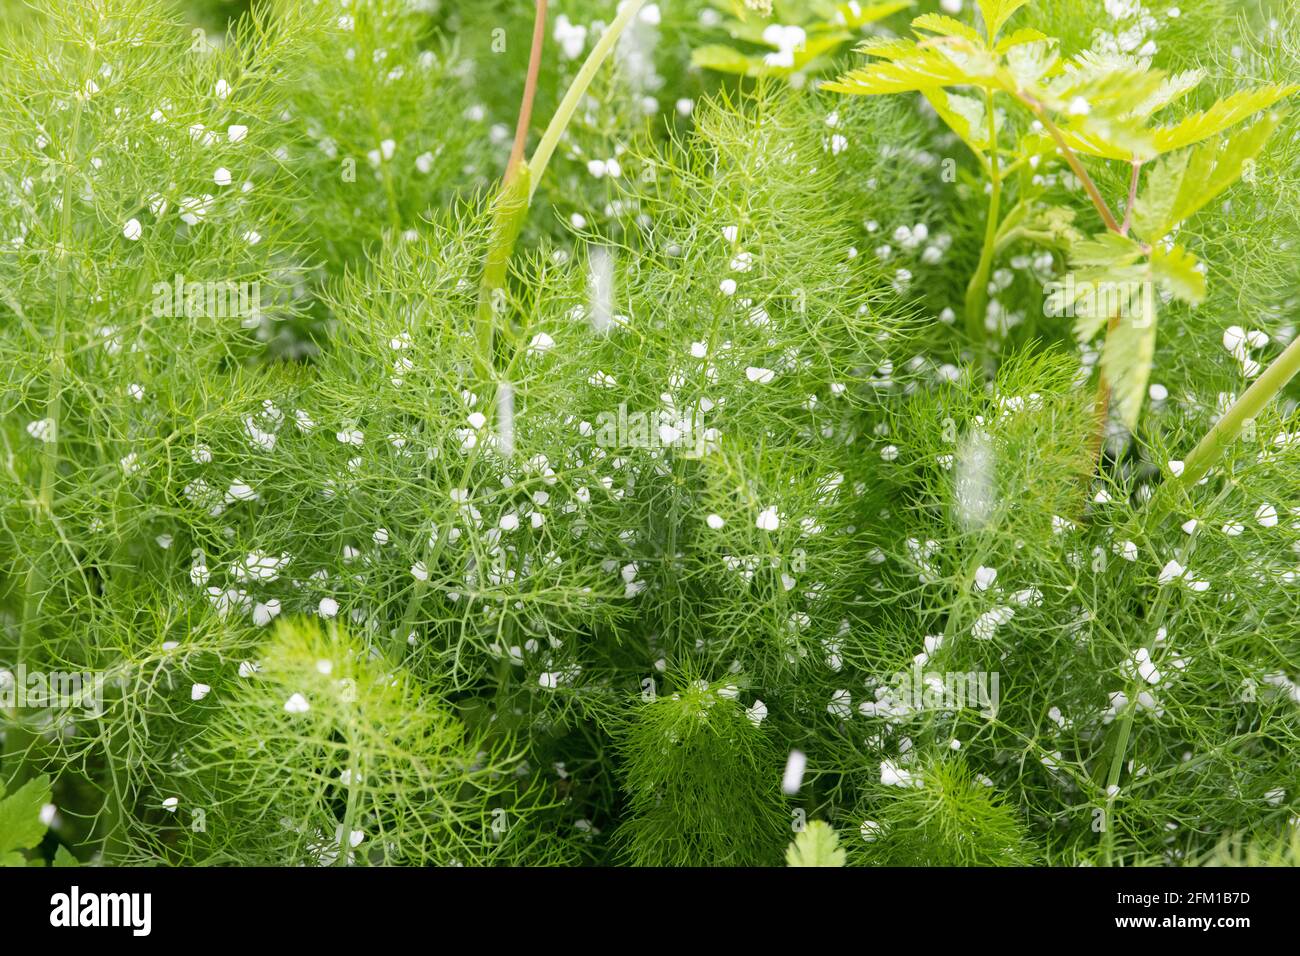 Hail stones covering new spring growth of Fennel (Foeniculum vulgare) plant in May garden - Scotland, UK Stock Photo